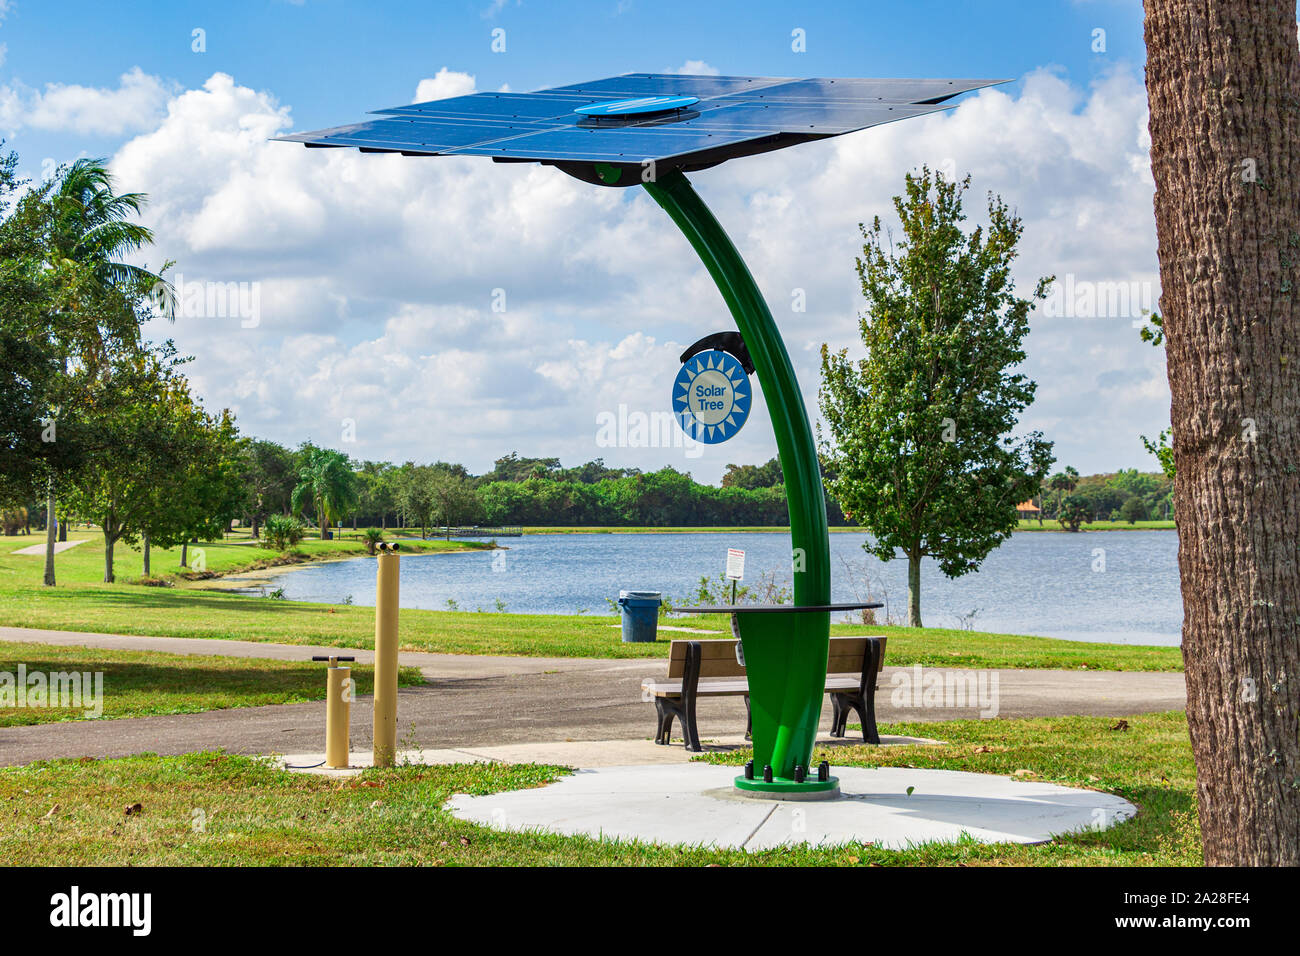 A Solar Tree installed by Florida Power and Light (FPL) at Tradewinds Park - Coconut Creek, Florida, USA Stock Photo